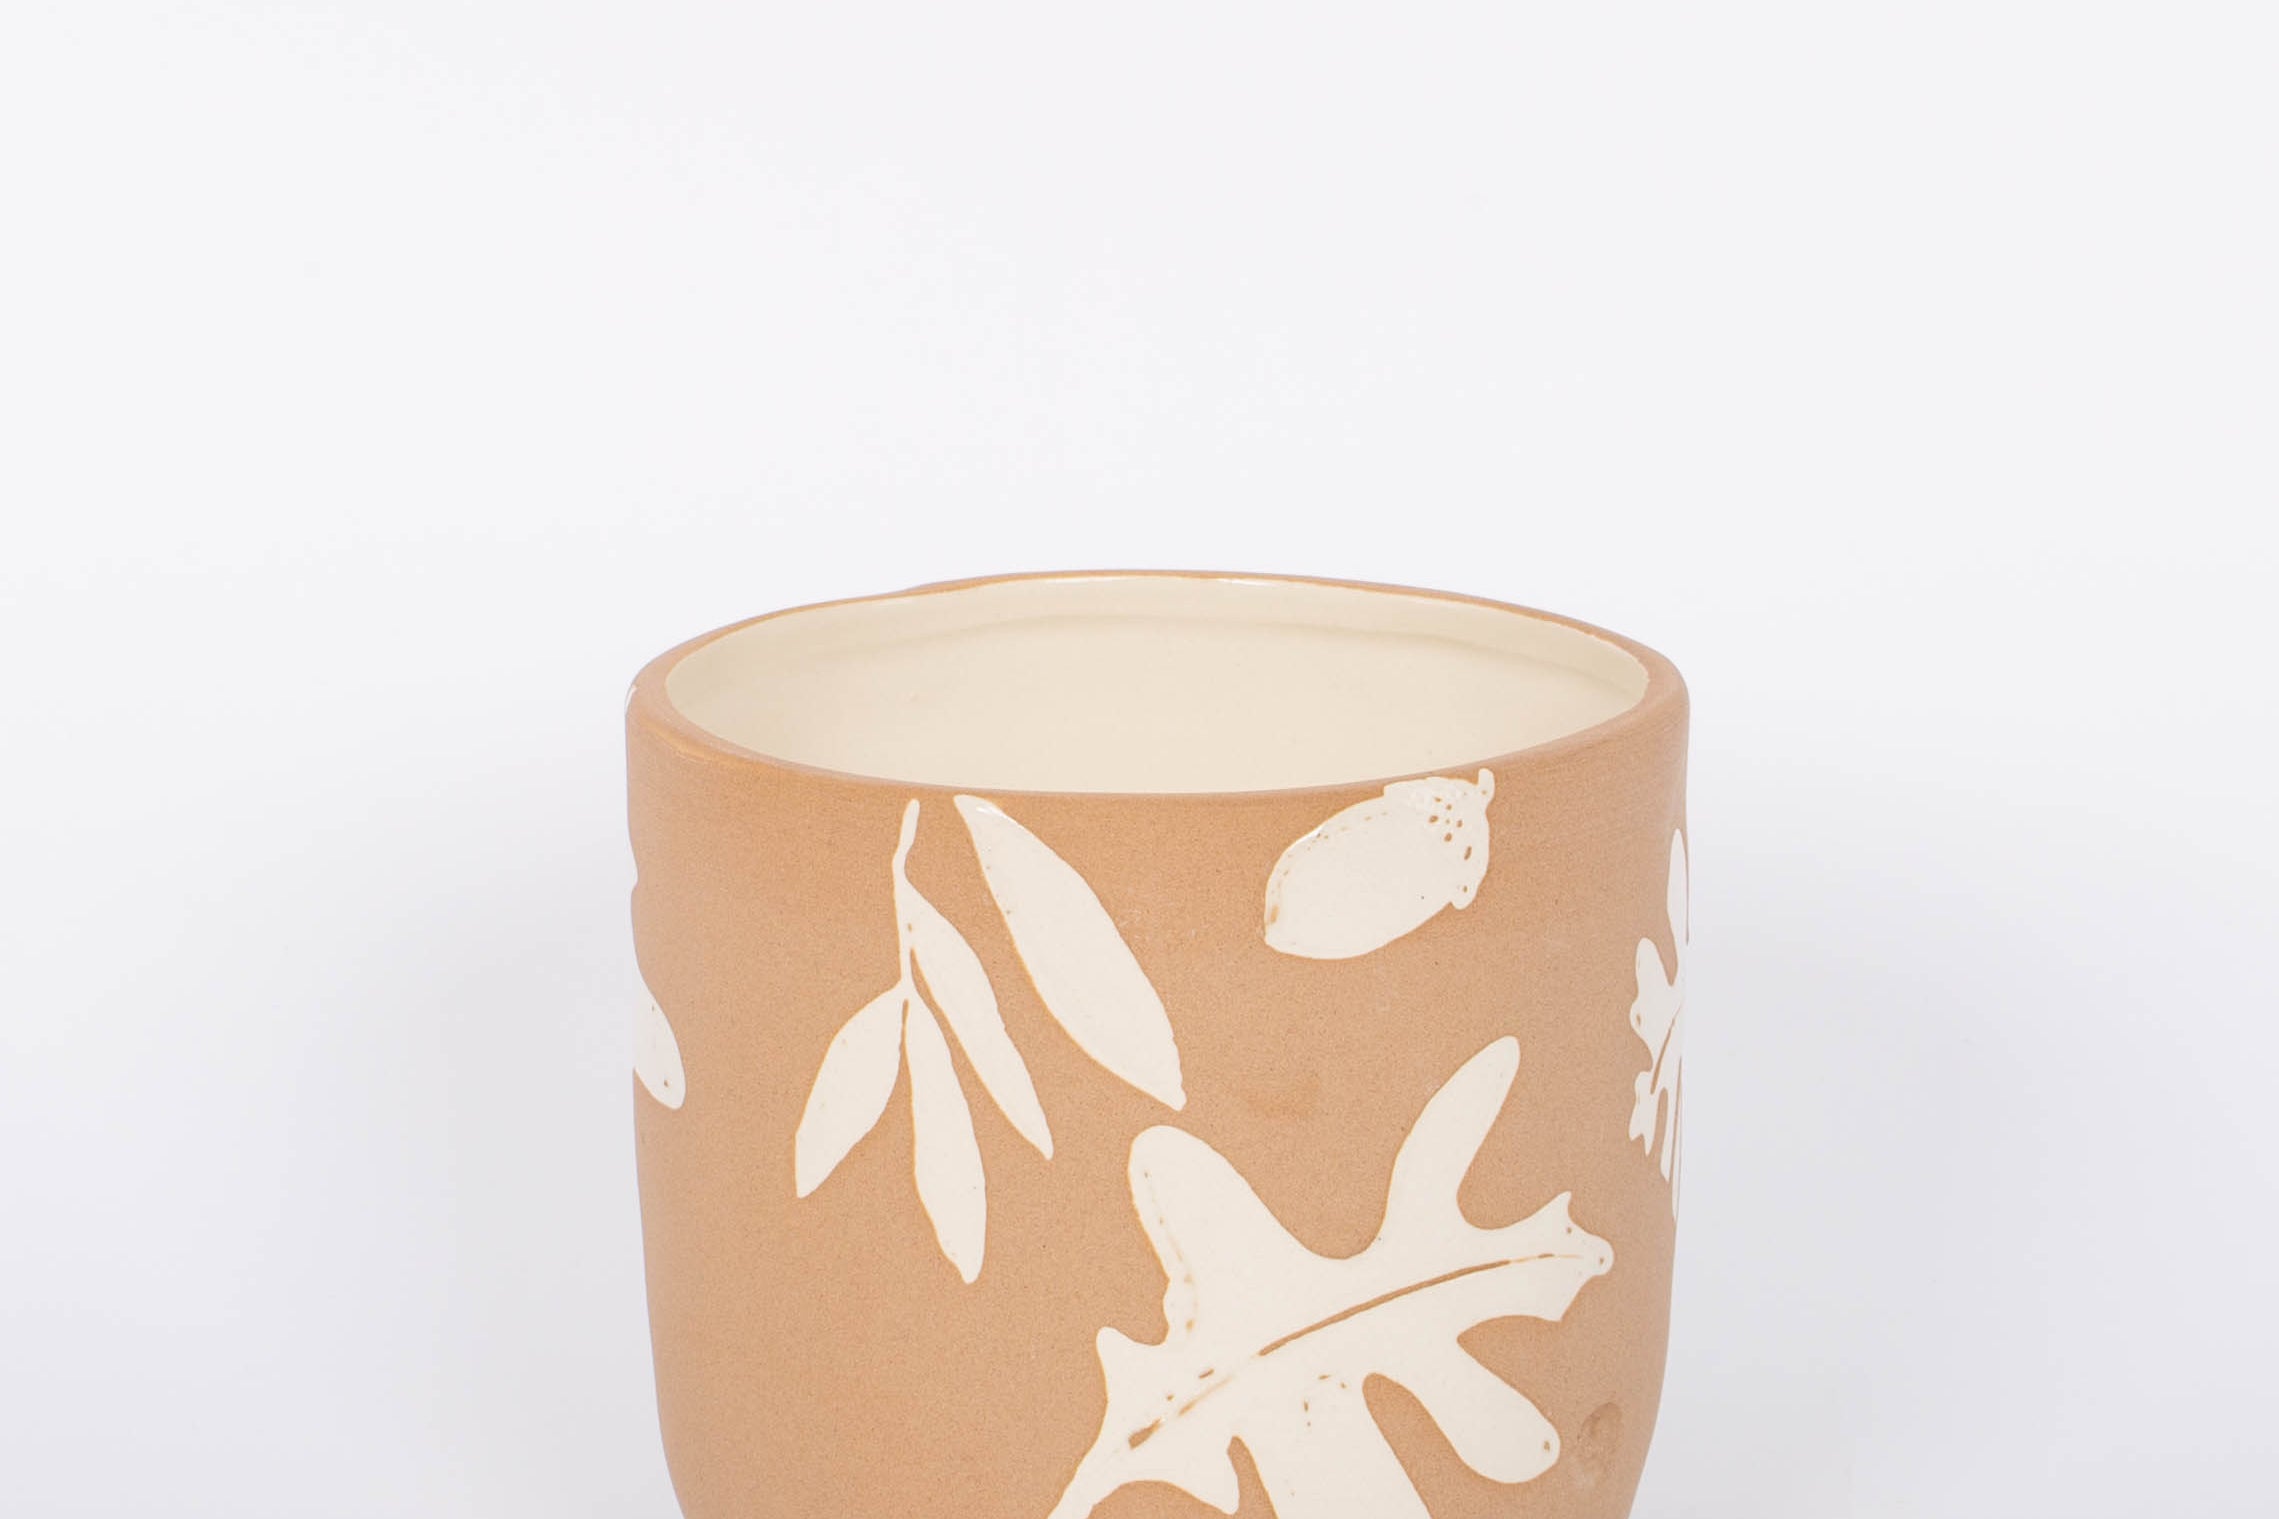 Rustling Pot with oak leaves and acorns pattern in white glazed ceramic and natural bisque. White background.